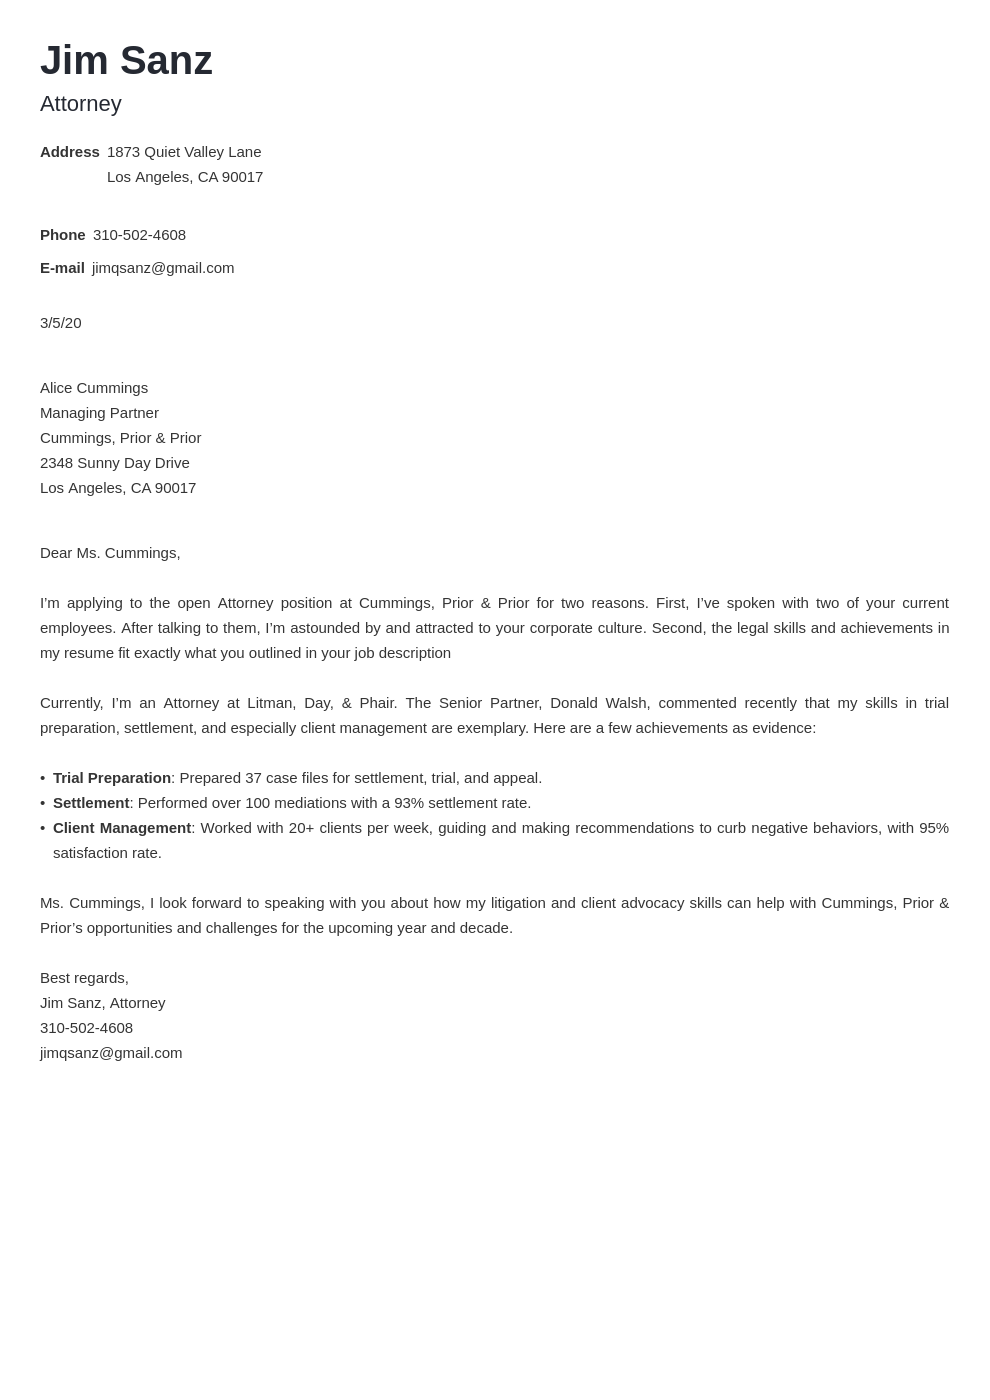 example of lawyer cover letter